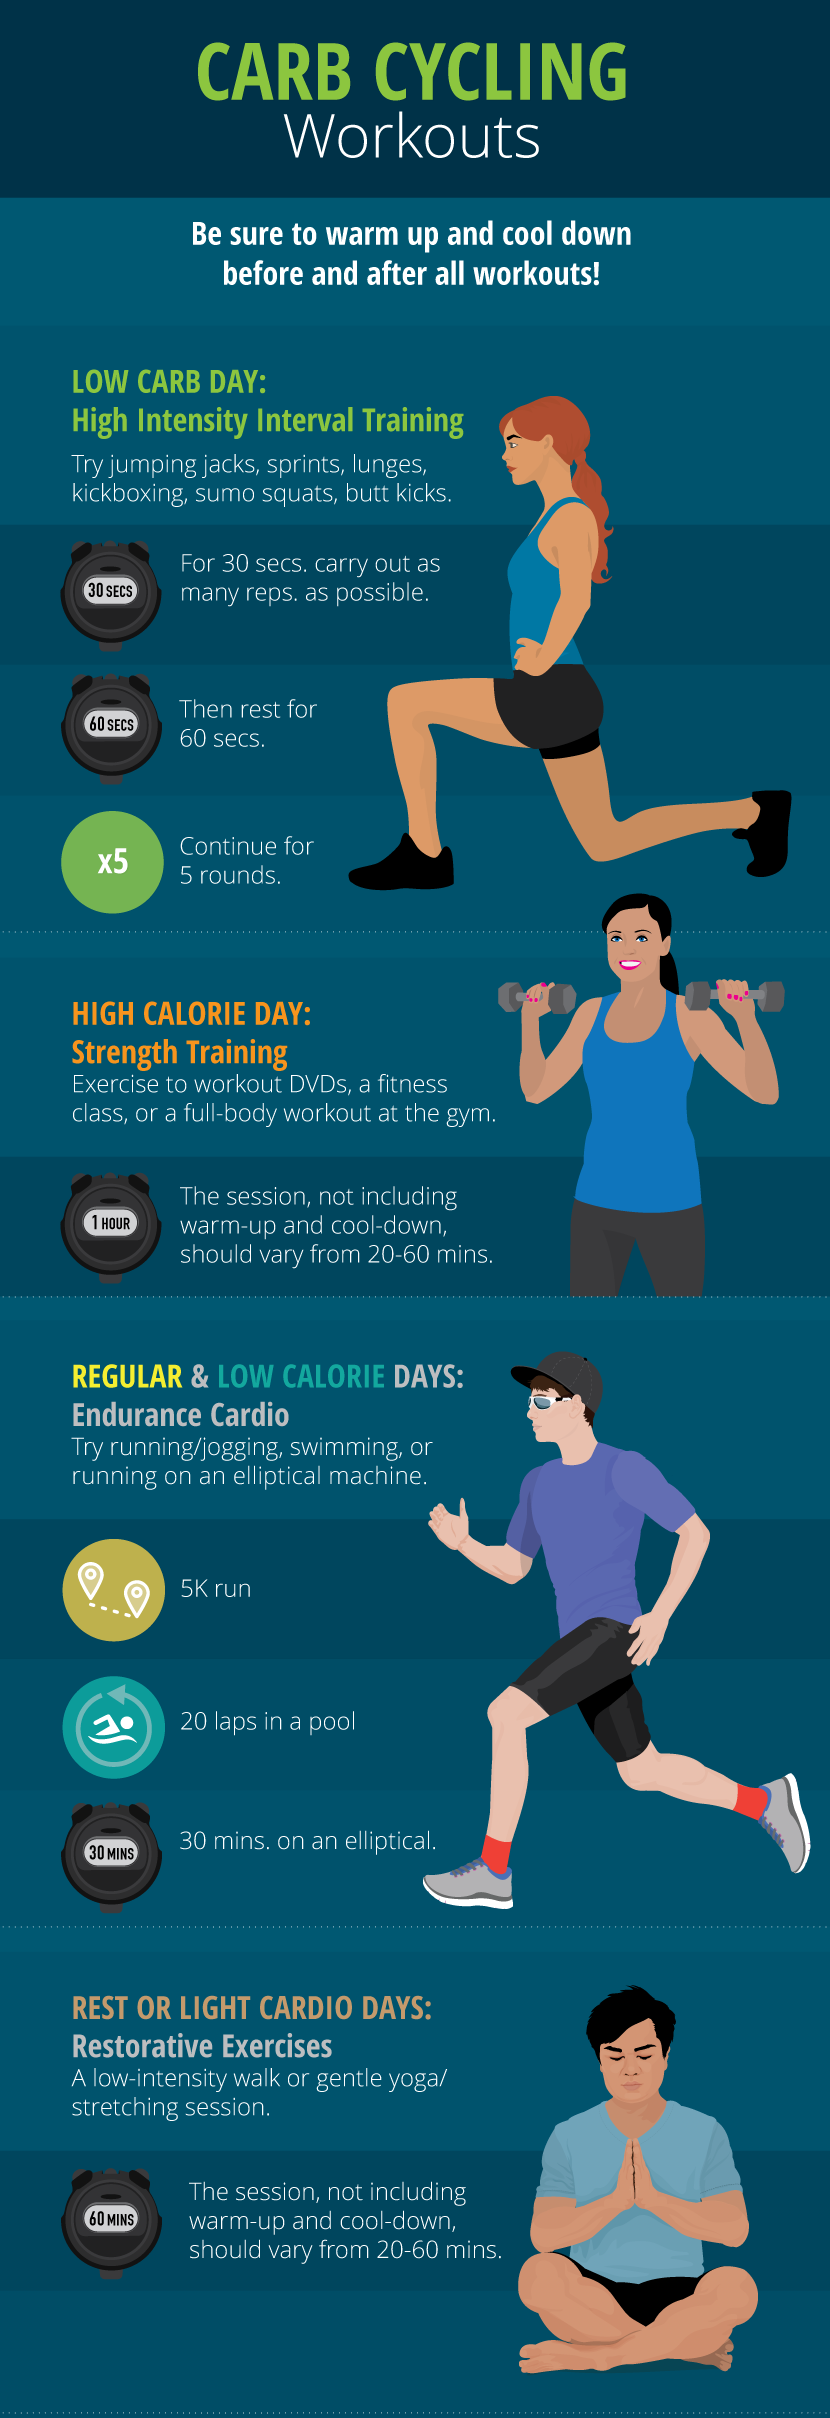 Carb cycling workouts 